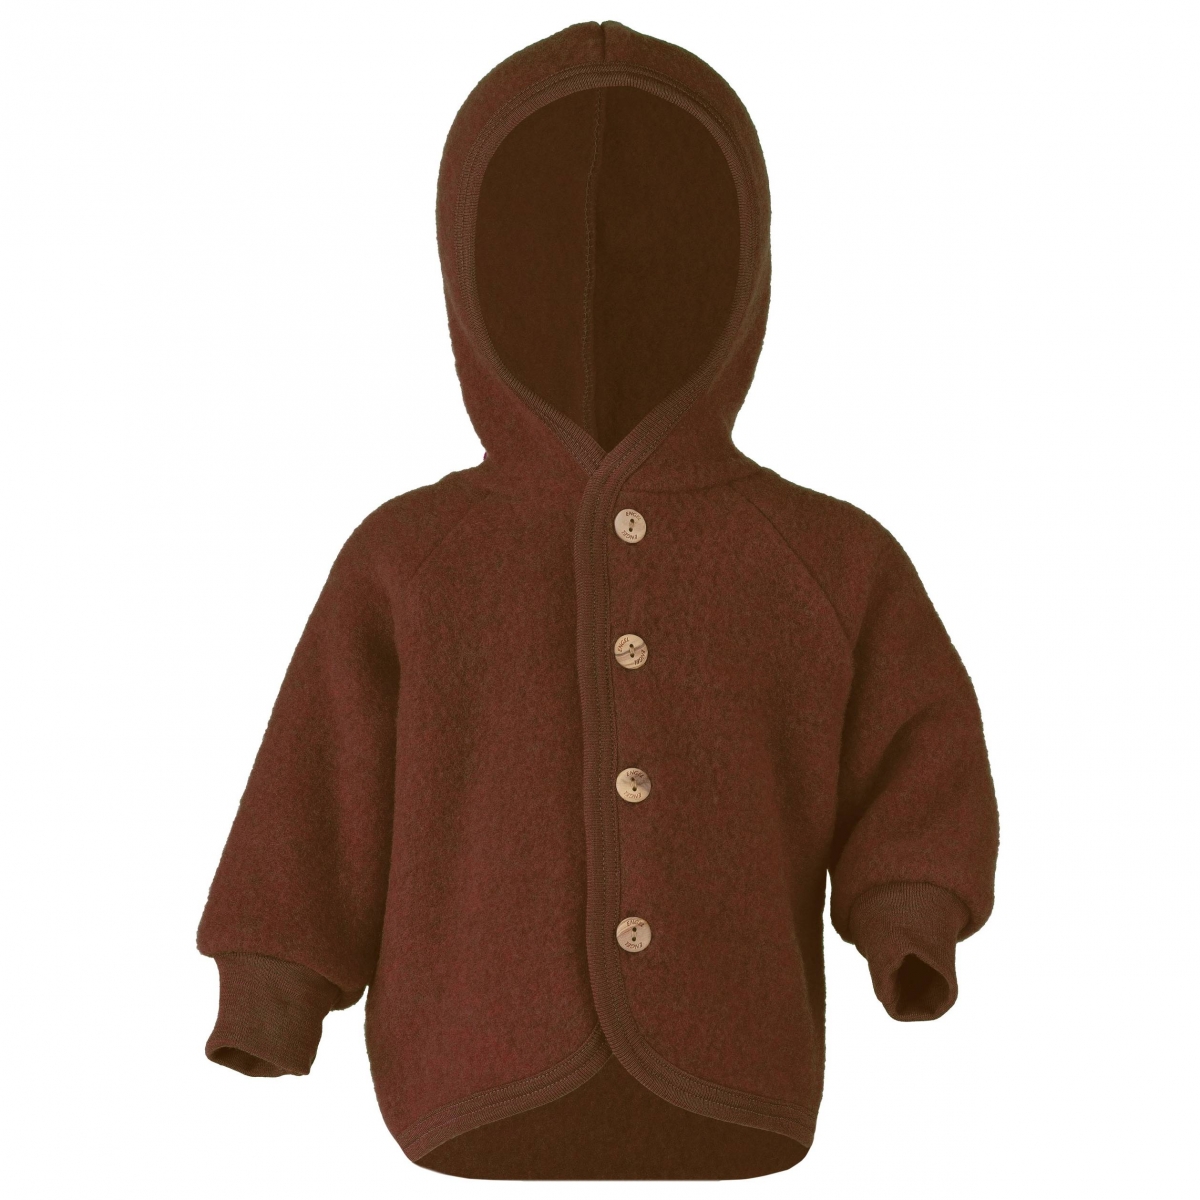 ENGEL Natur Hooded jacket with wooden buttons cinnamon melange 575520-079E 